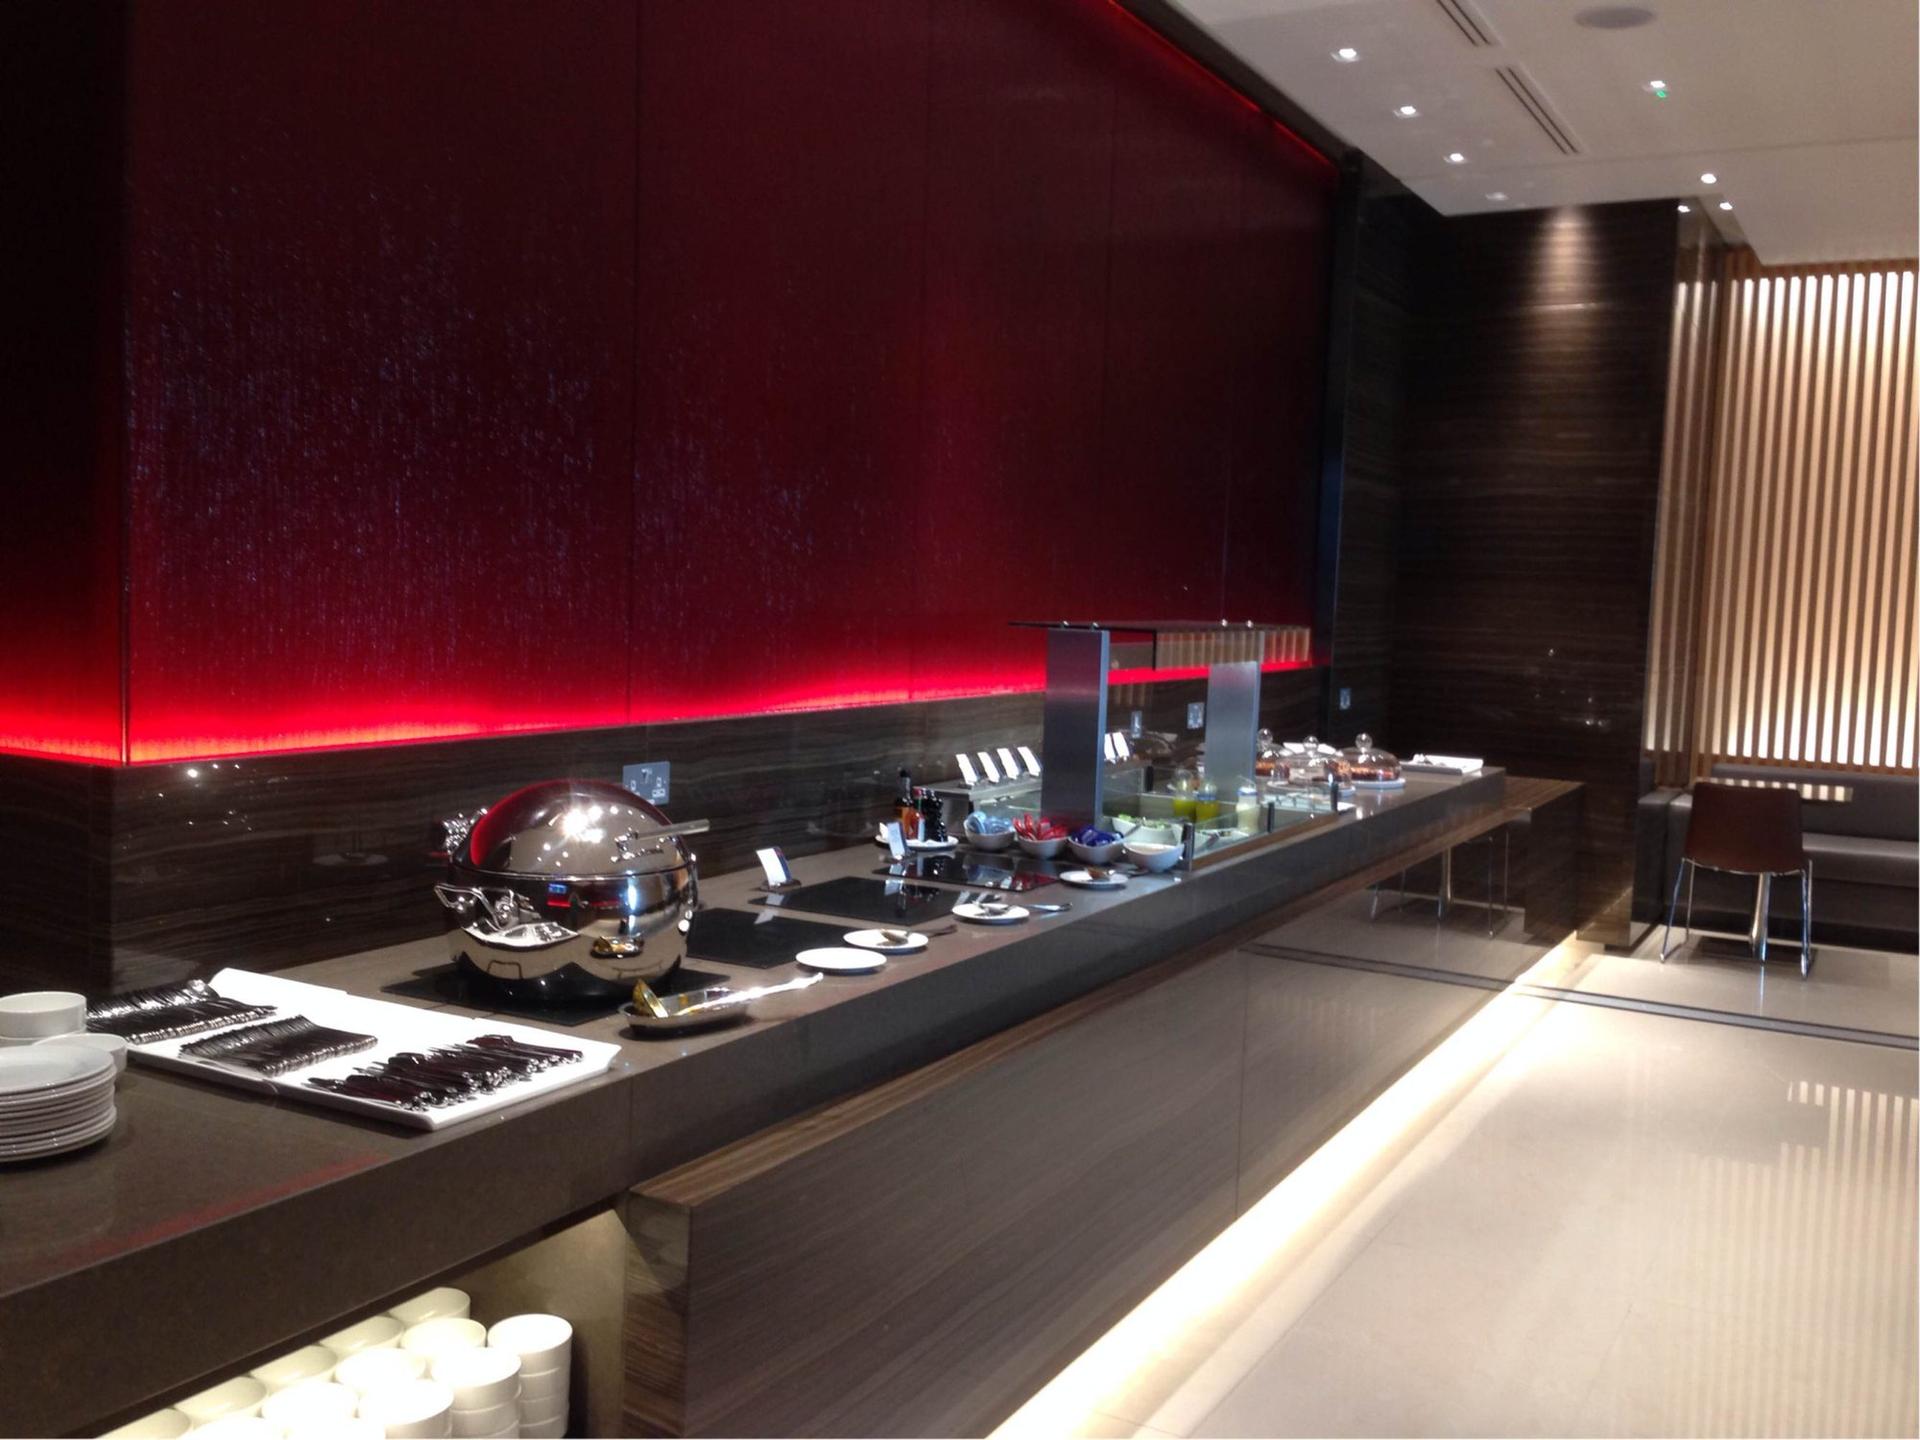 Air Canada Maple Leaf Lounge image 3 of 27